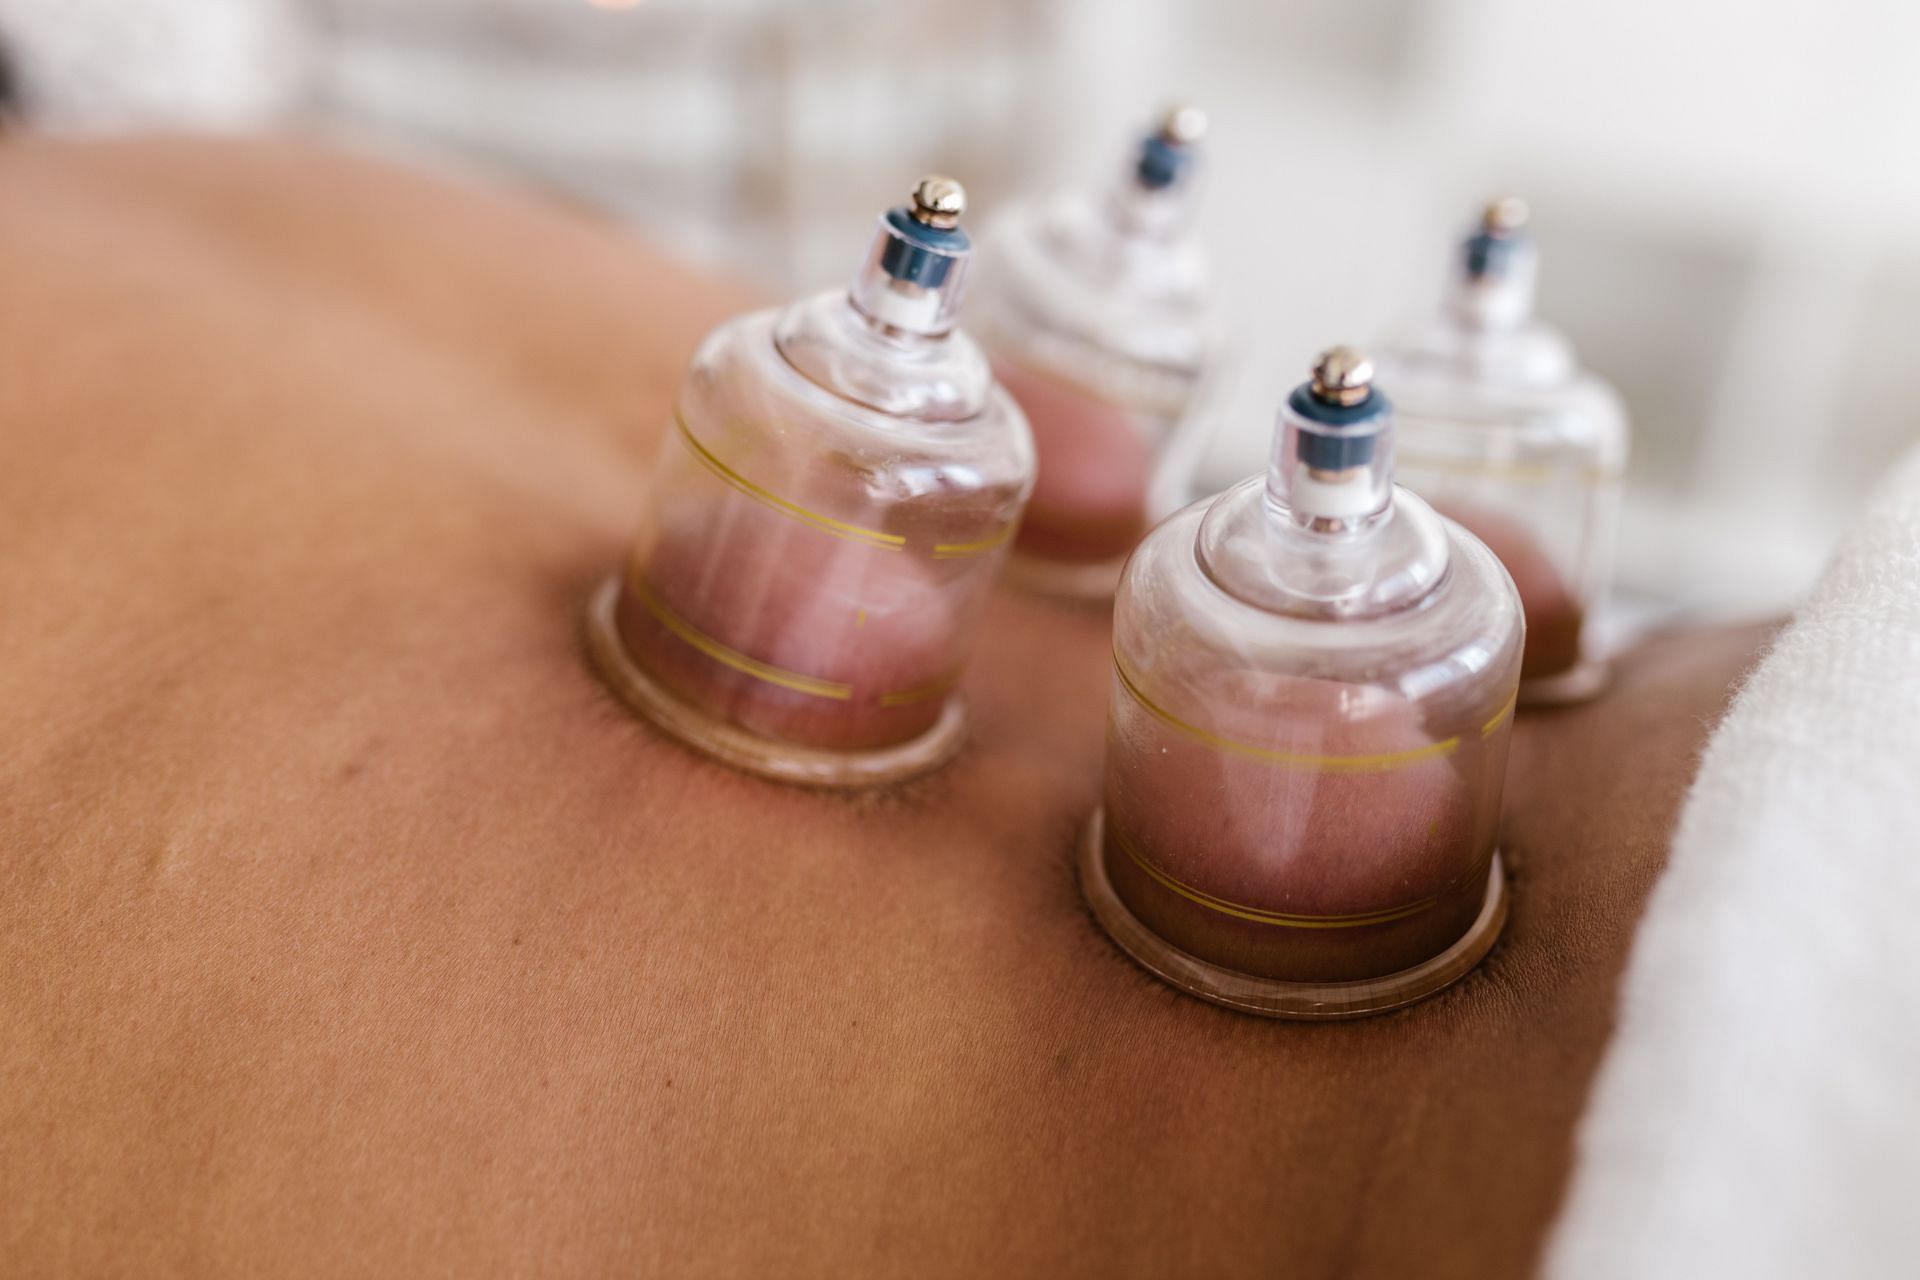 Bruising, pain, swelling, and red markings are unavoidable side effects of cupping. (Image via Pexels/ Rodnae Productions)